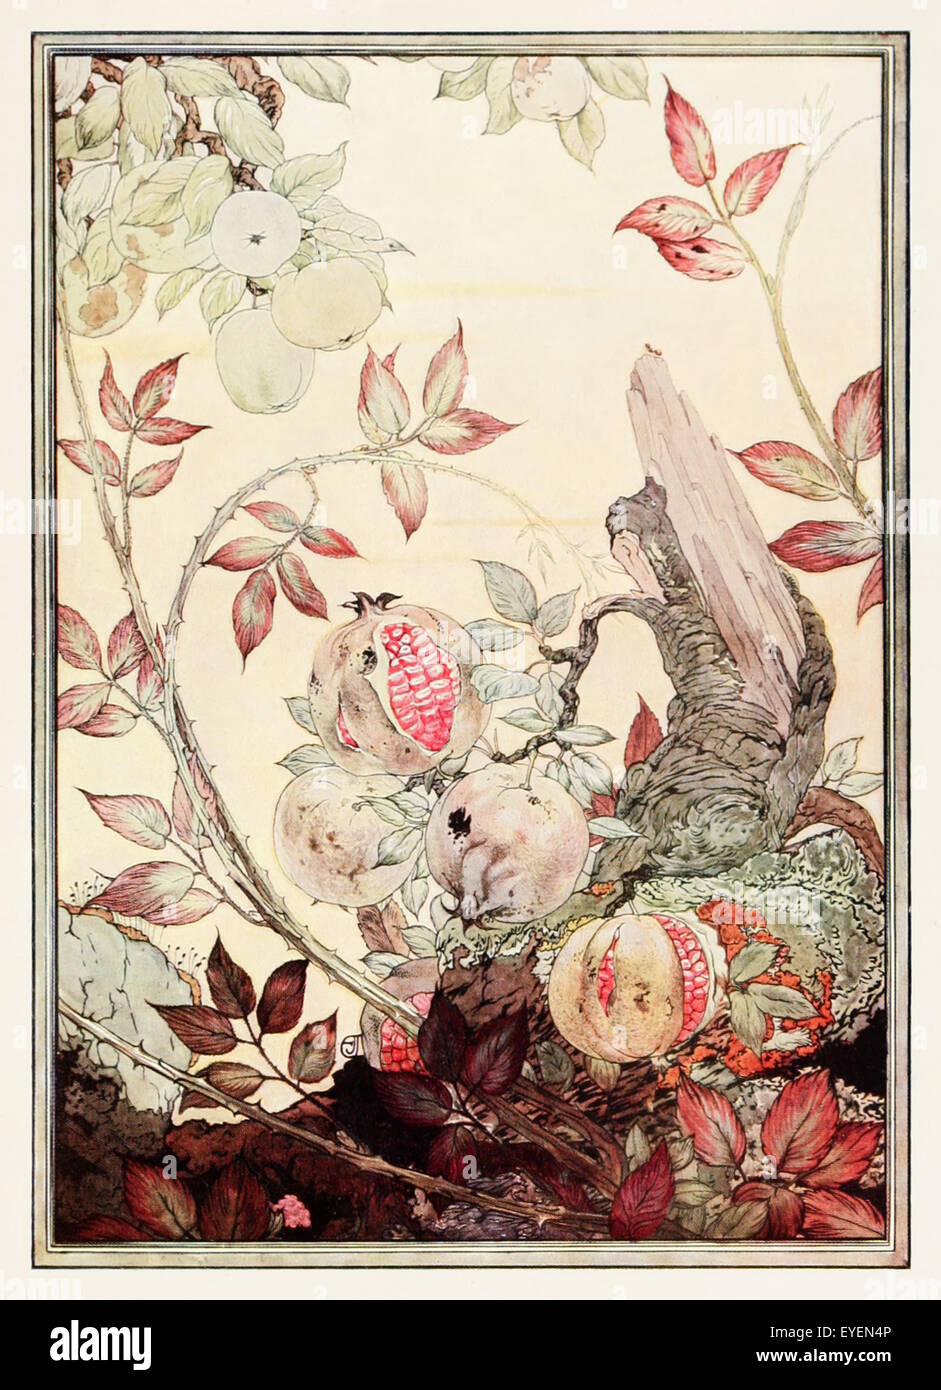 'The Pomegranate, the Apple Tree, and the Bramble' fable by Aesop (circa 600BC). Two fruit trees argue which is the most beautiful and the bramble asks them to cease in their presence. Everyone thinks themselves the best. Illustration by Edward J. Detmold (1883-1957). See description for more information. Stock Photo